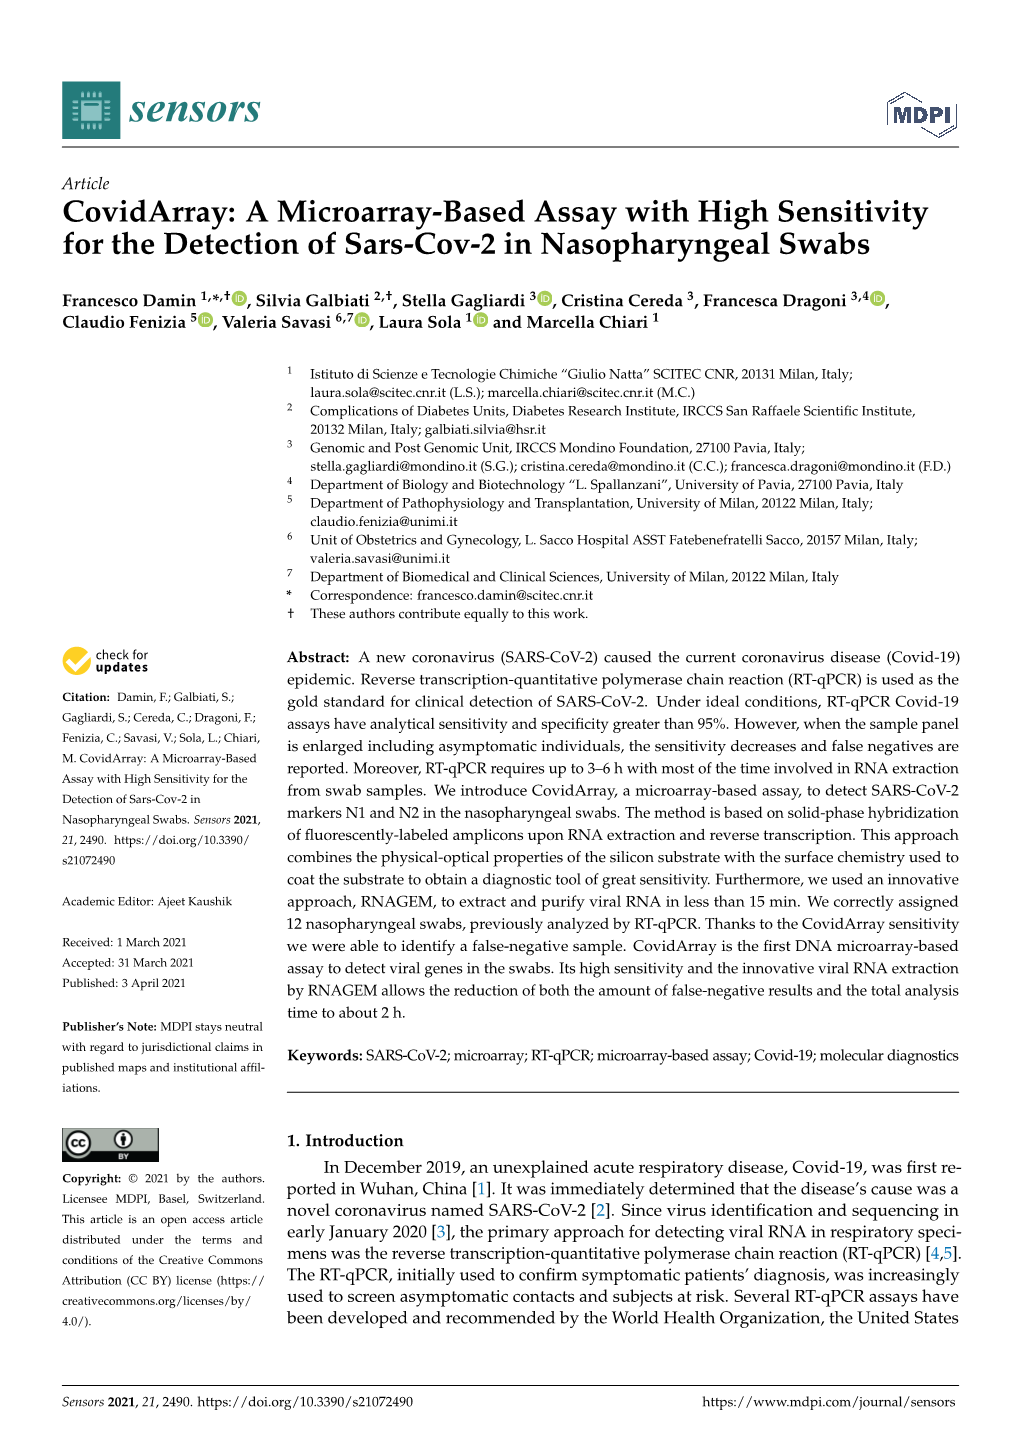 A Microarray-Based Assay with High Sensitivity for the Detection of Sars-Cov-2 in Nasopharyngeal Swabs